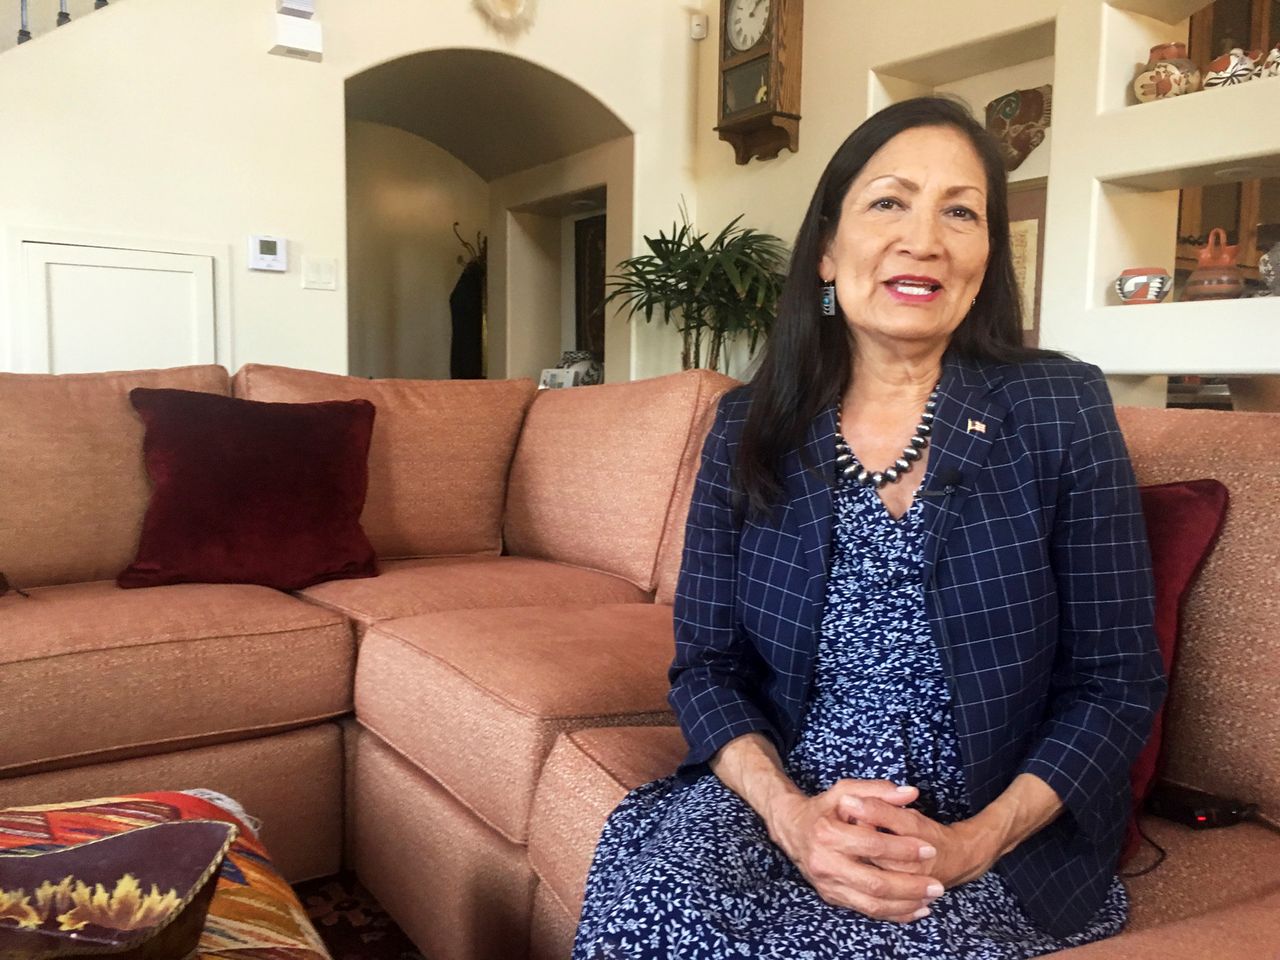 Rep. Deb Haaland (D-N.M.), one of two Native women who just made history by getting elected Congress, has defended Warren's efforts to understand her ancestry.